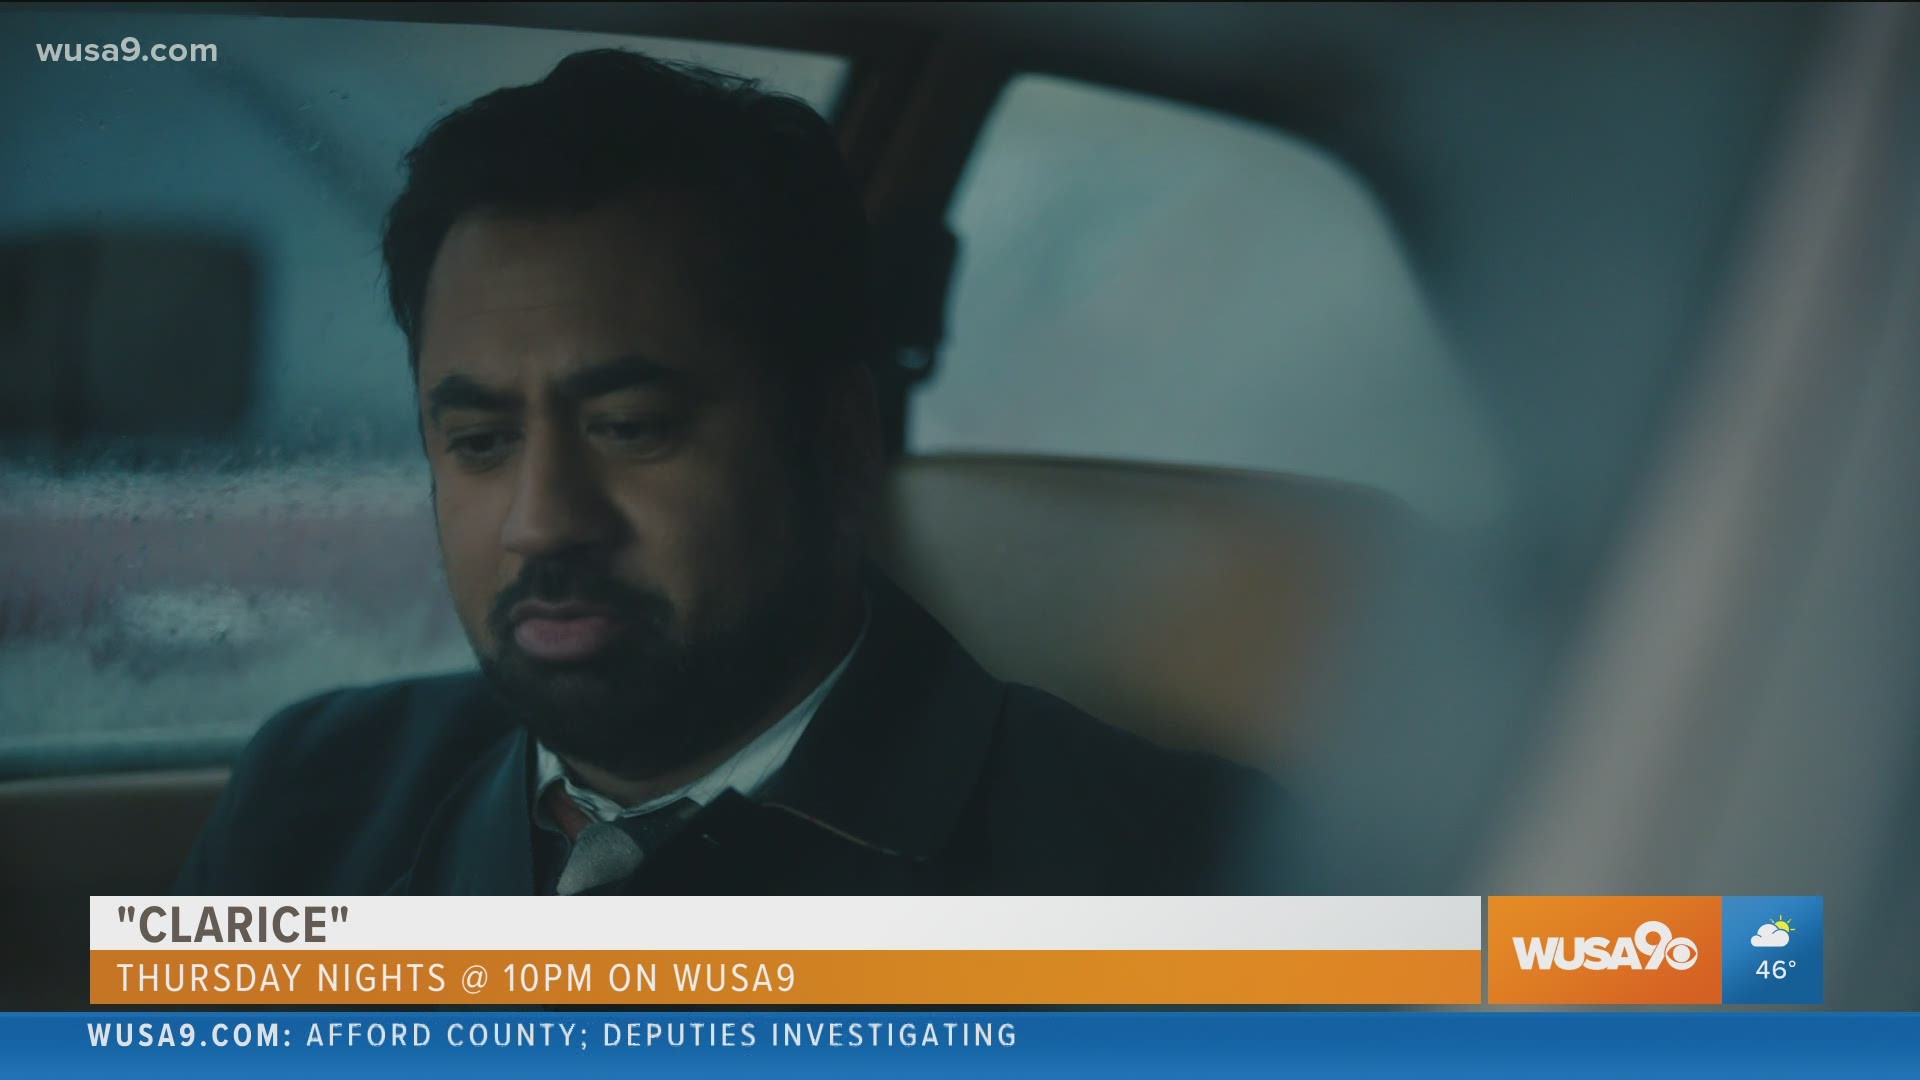 Kal Penn shares his experience on the Silence of the Lambs series "Clarice". It airs on Thursdays on CBS at 10pm.